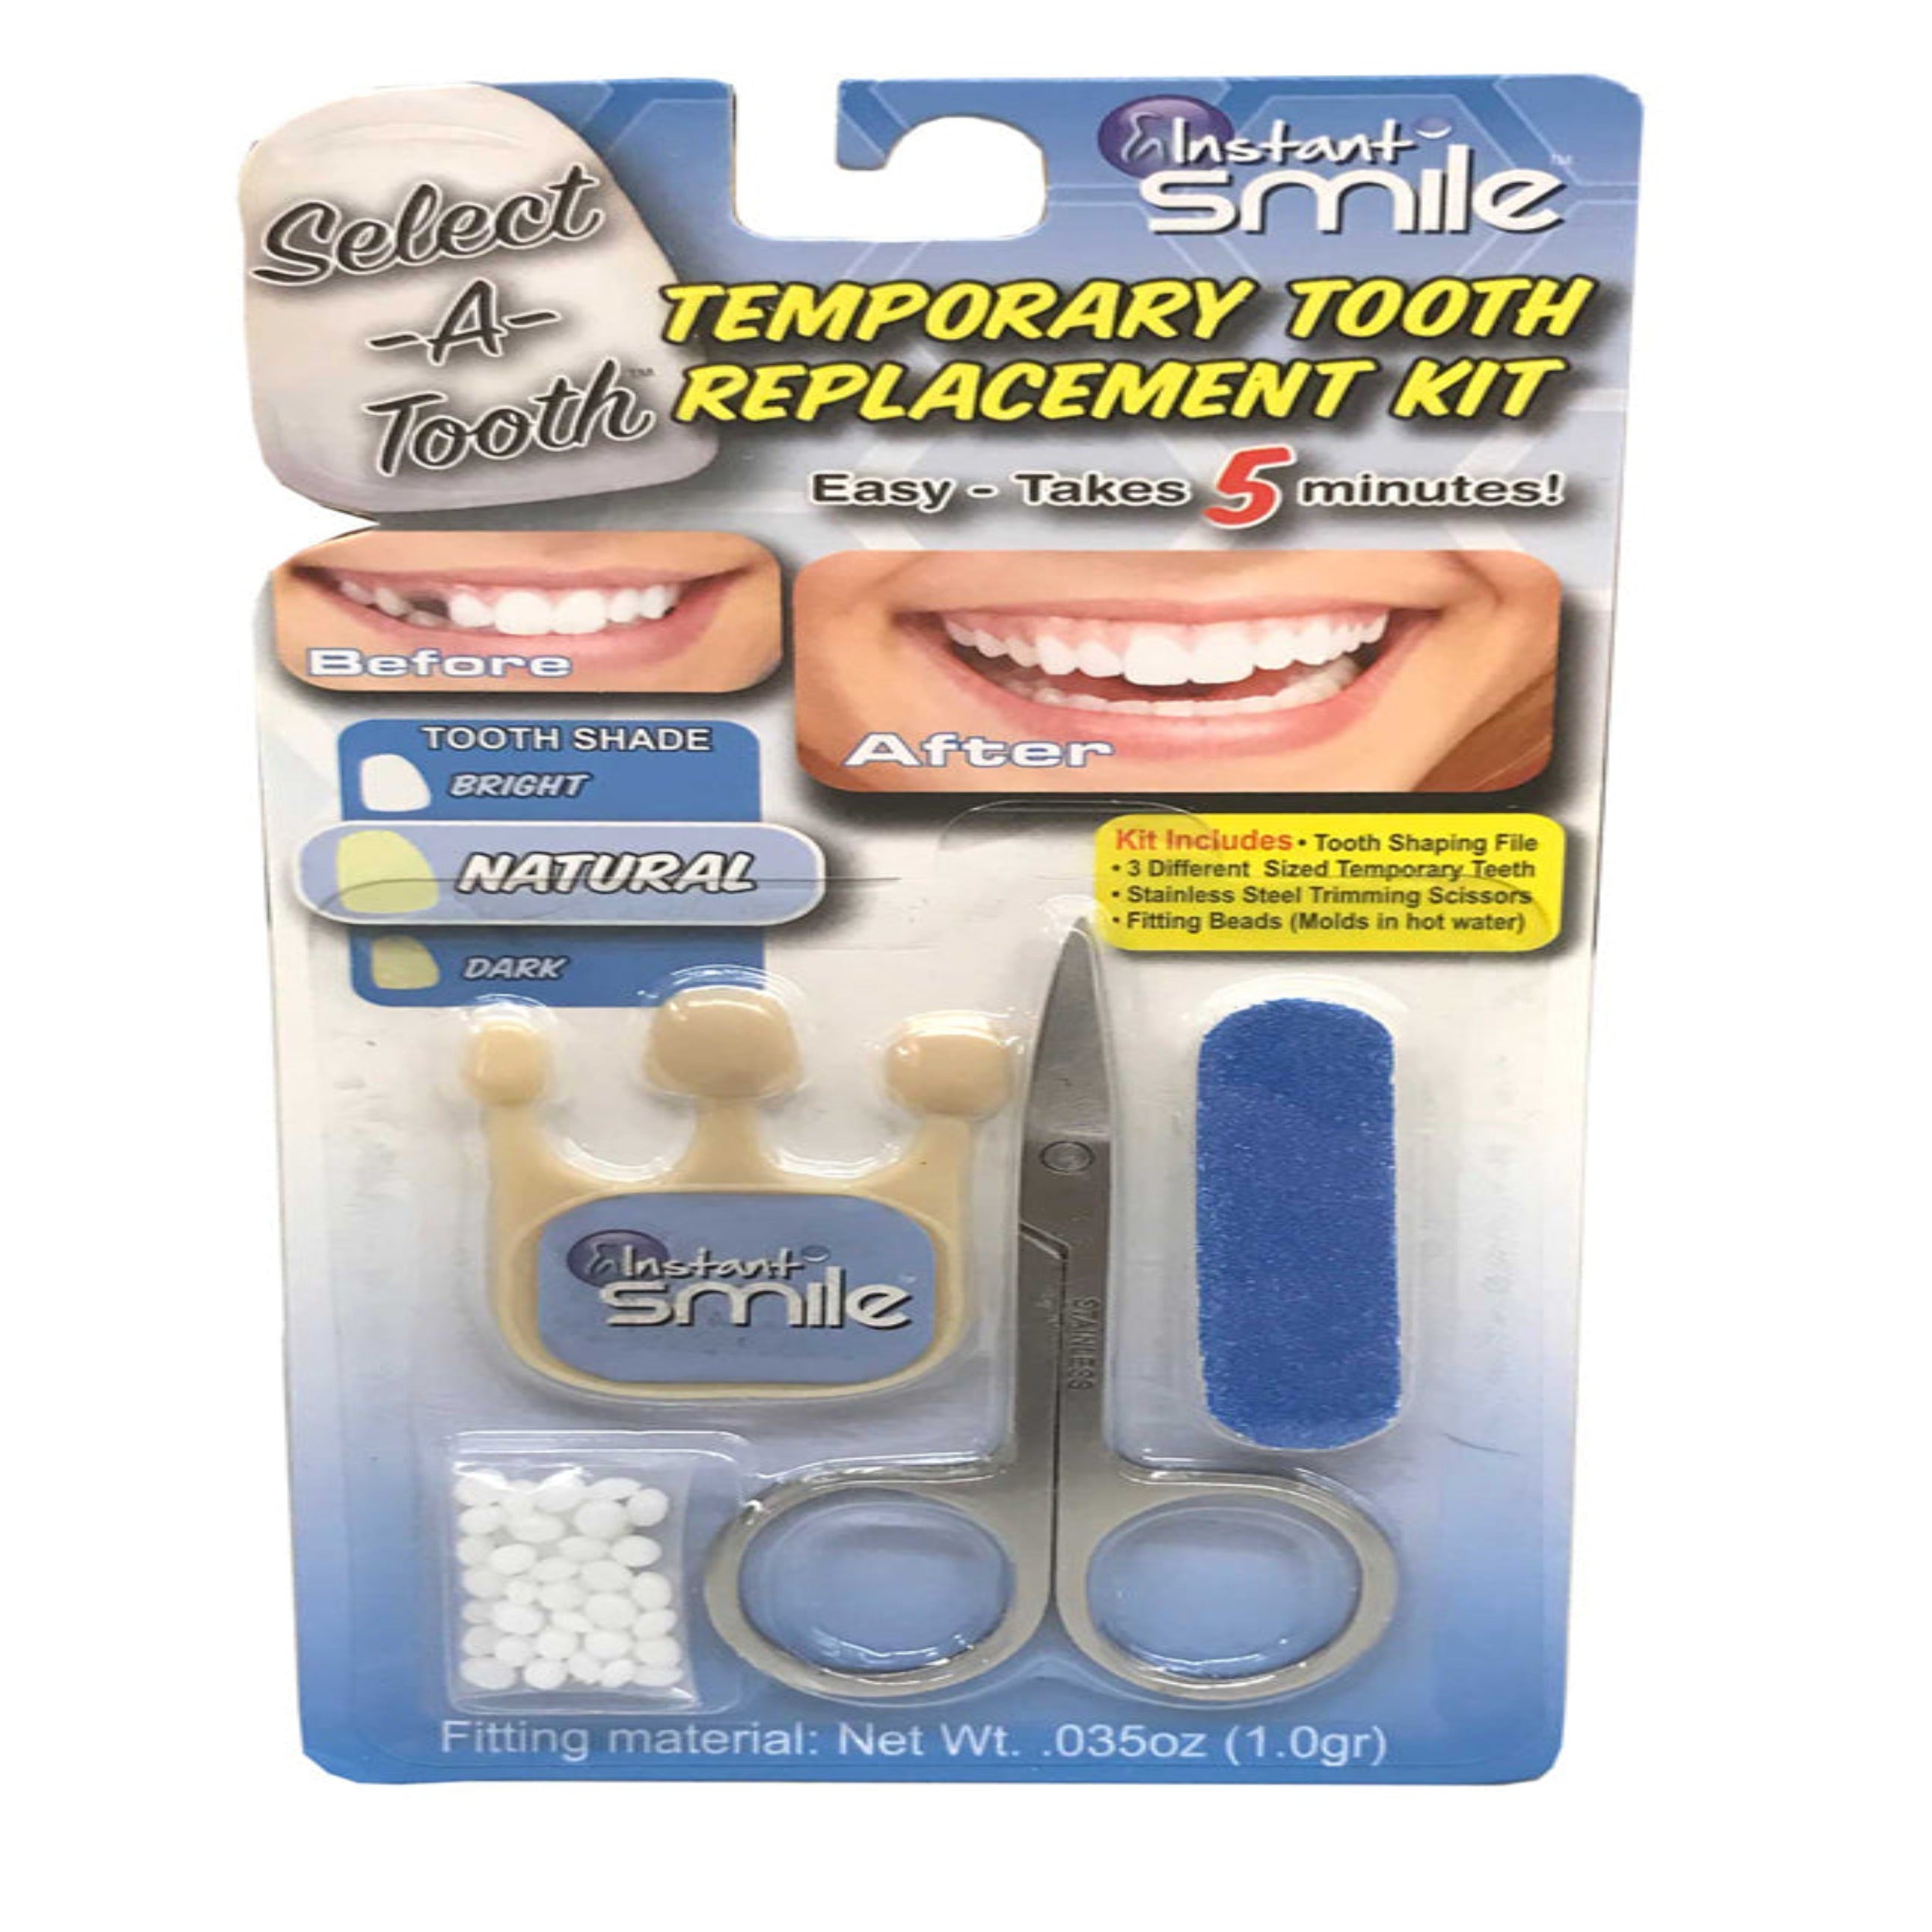 Wholesale Instant Smile Temporary Tooth Replacement Kit, Sold by the Piece